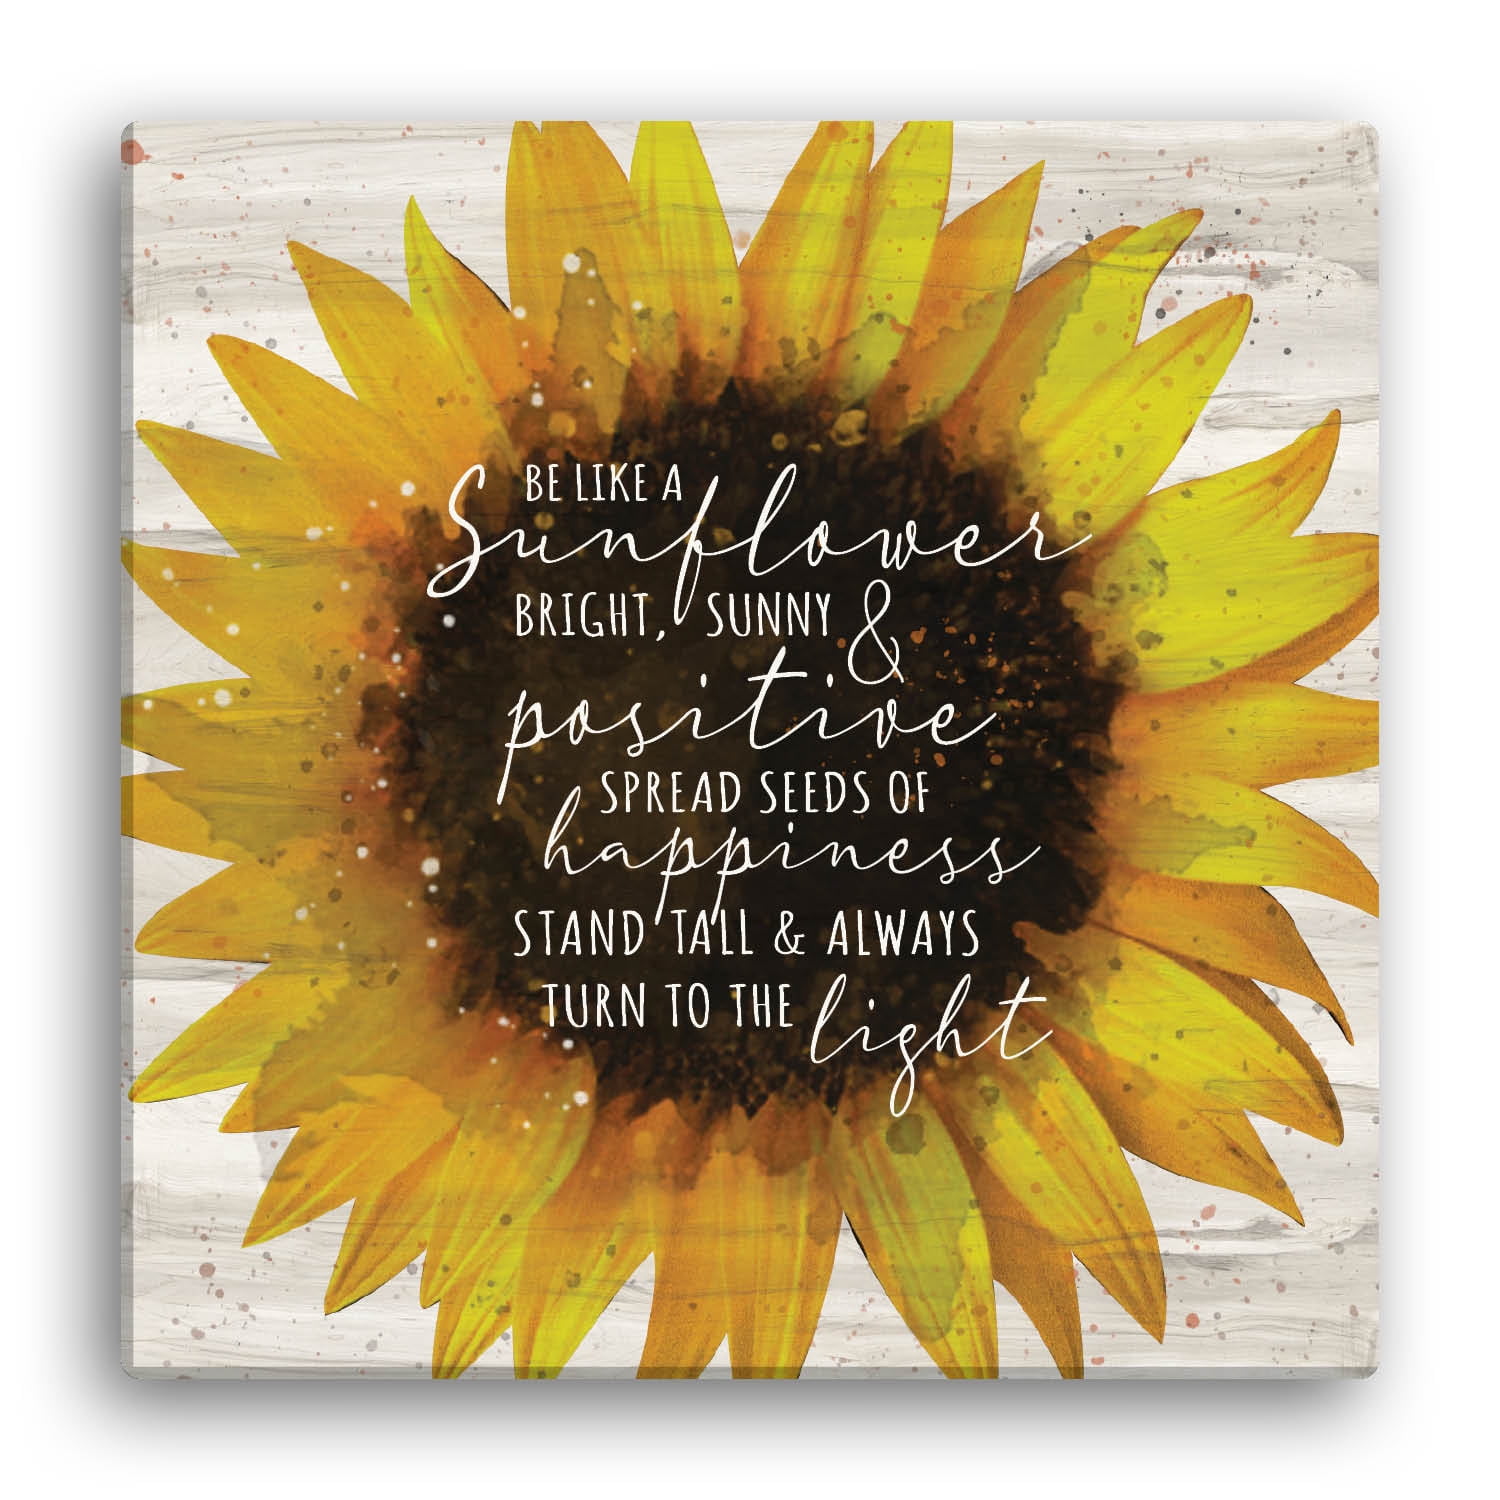 SUNFLOWERS PICTURE ON WATER PICTURE PRINT ON FRAMED CANVAS WALL ART DECORATION 